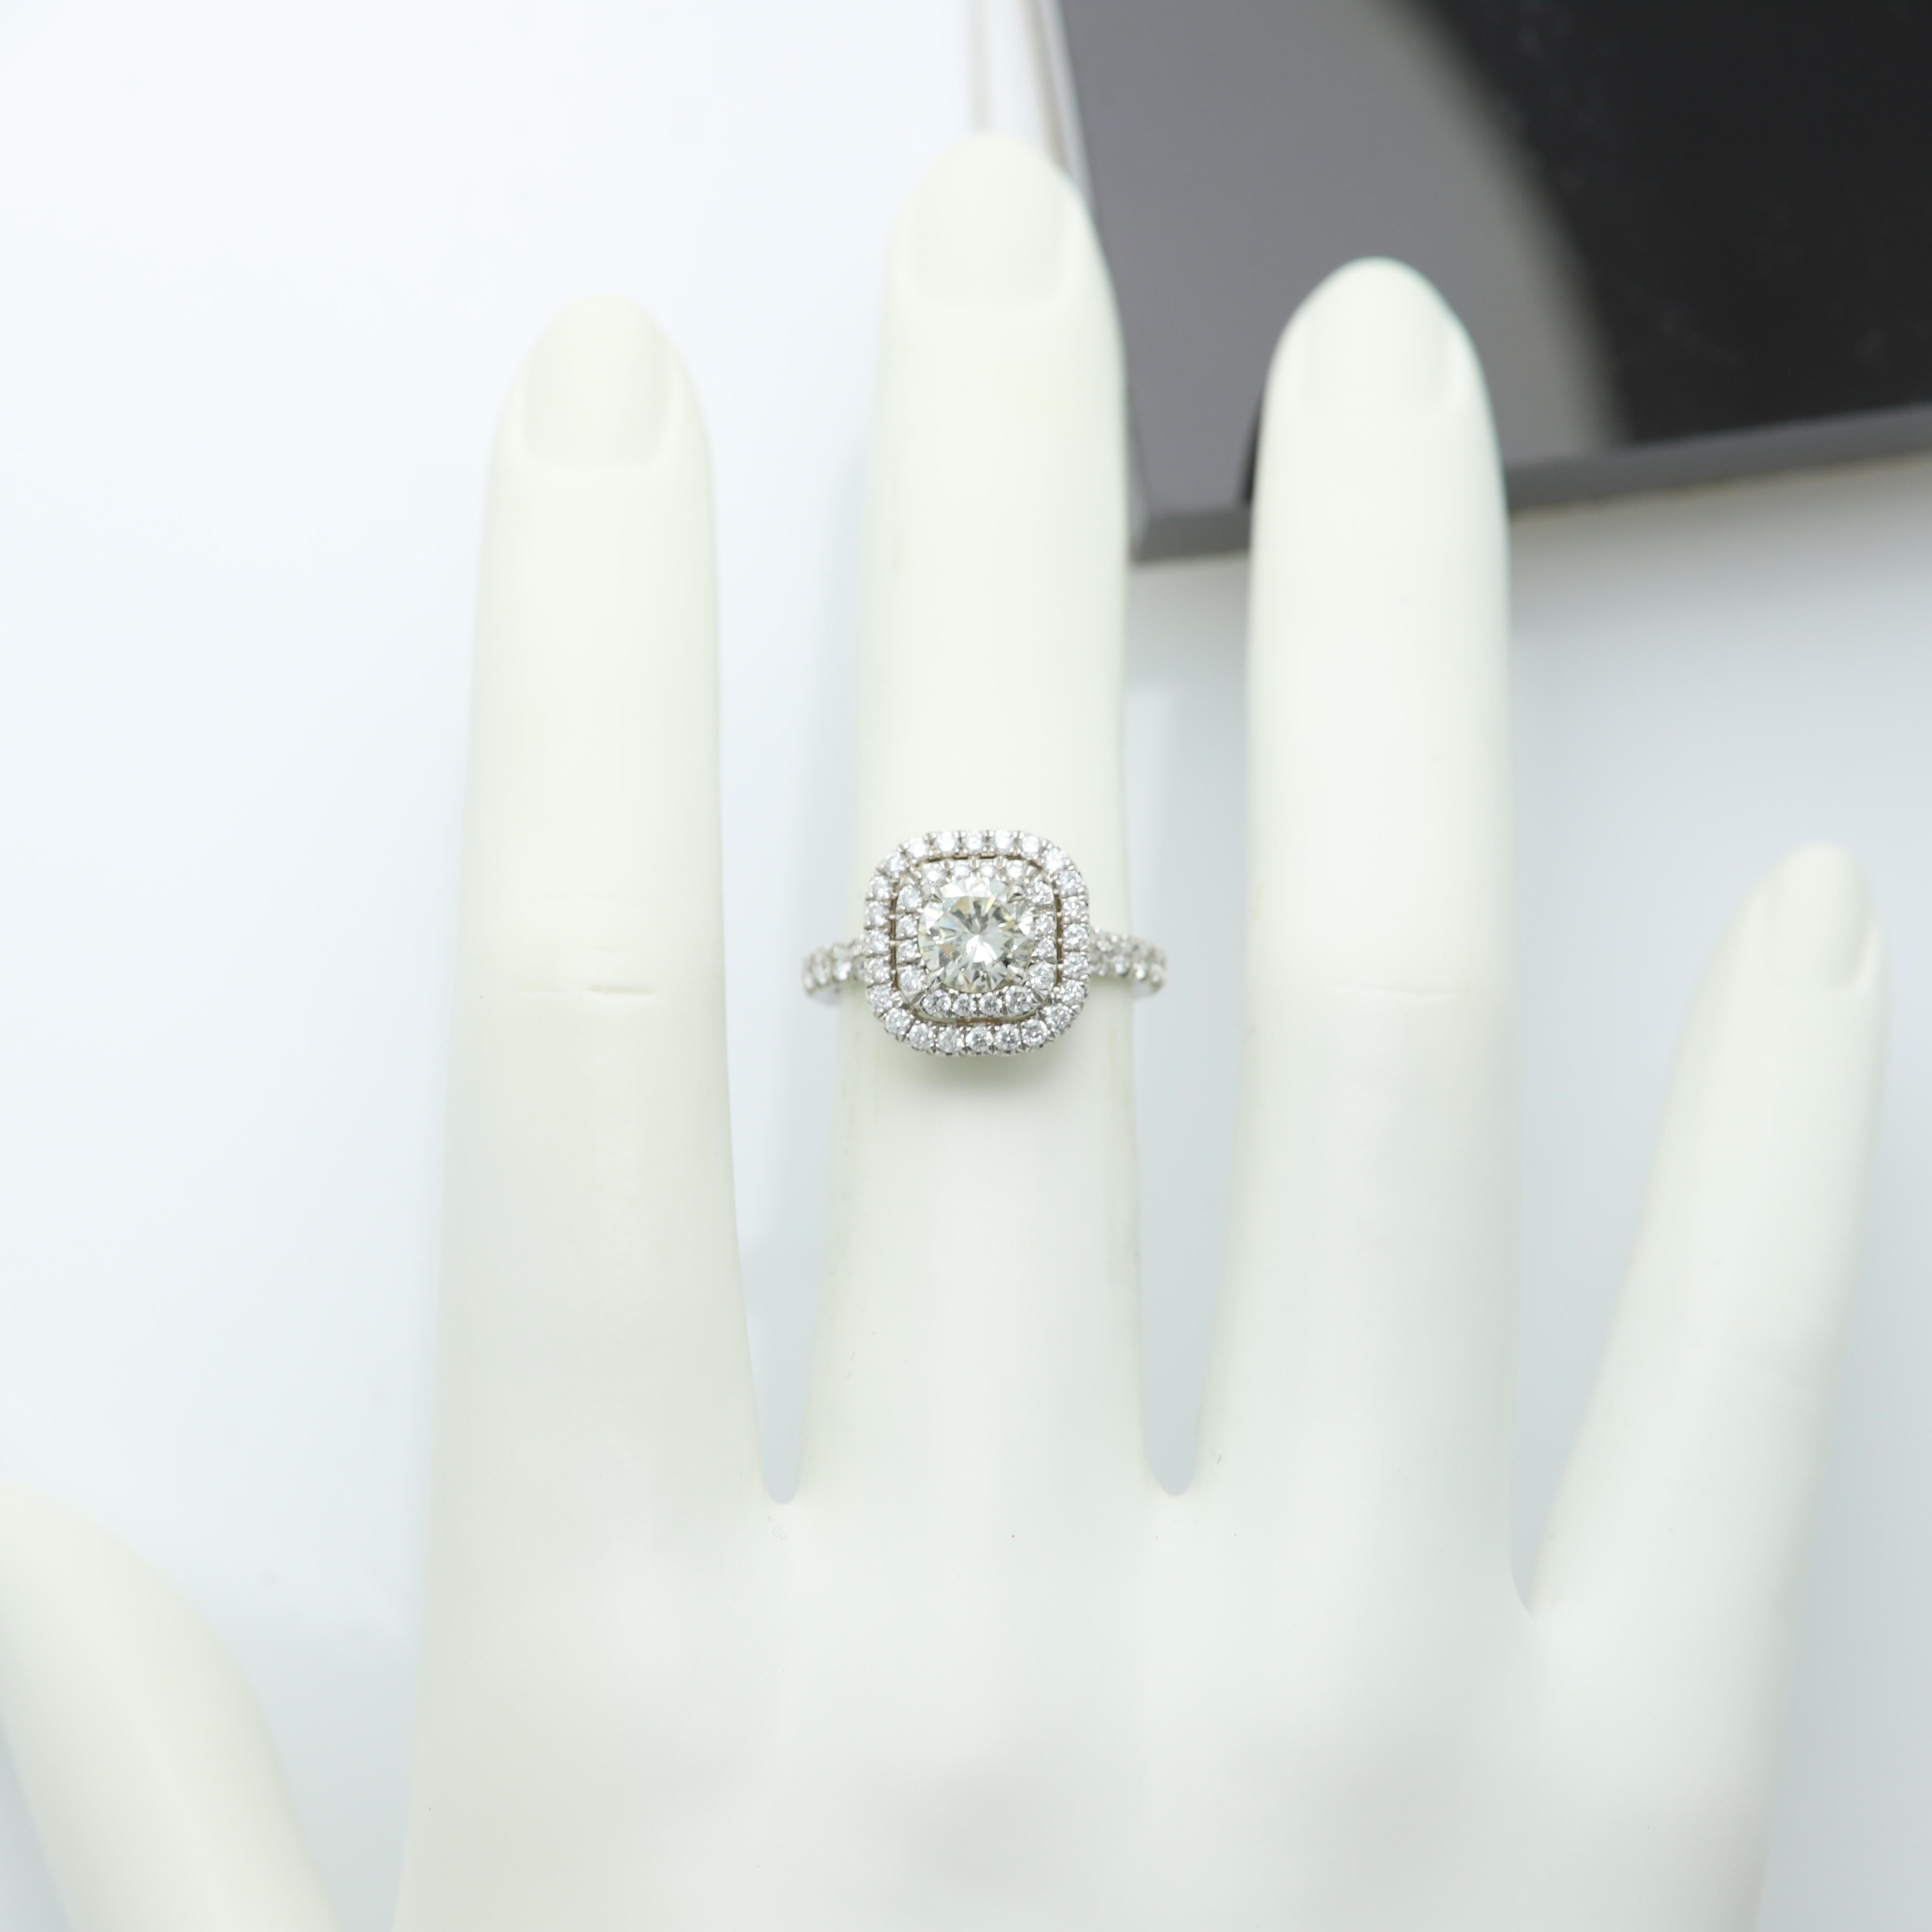 Cluster Diamond Ring 18 Karat White Gold Center Diamond 1.01 Carat In New Condition For Sale In Brooklyn, NY